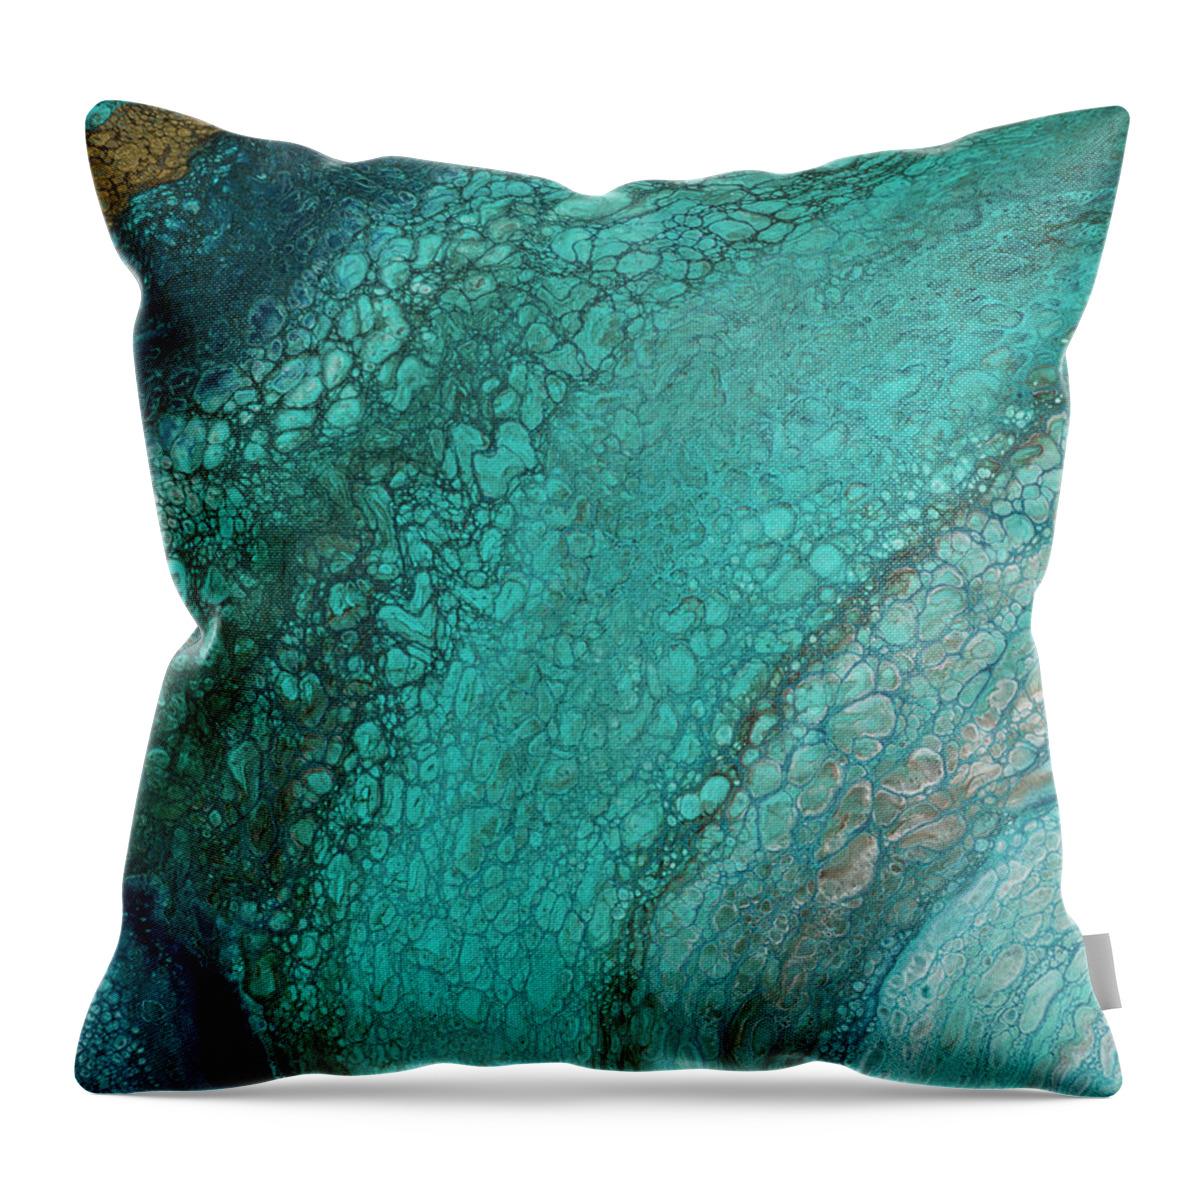 Organic Throw Pillow featuring the painting Lagoon by Tamara Nelson